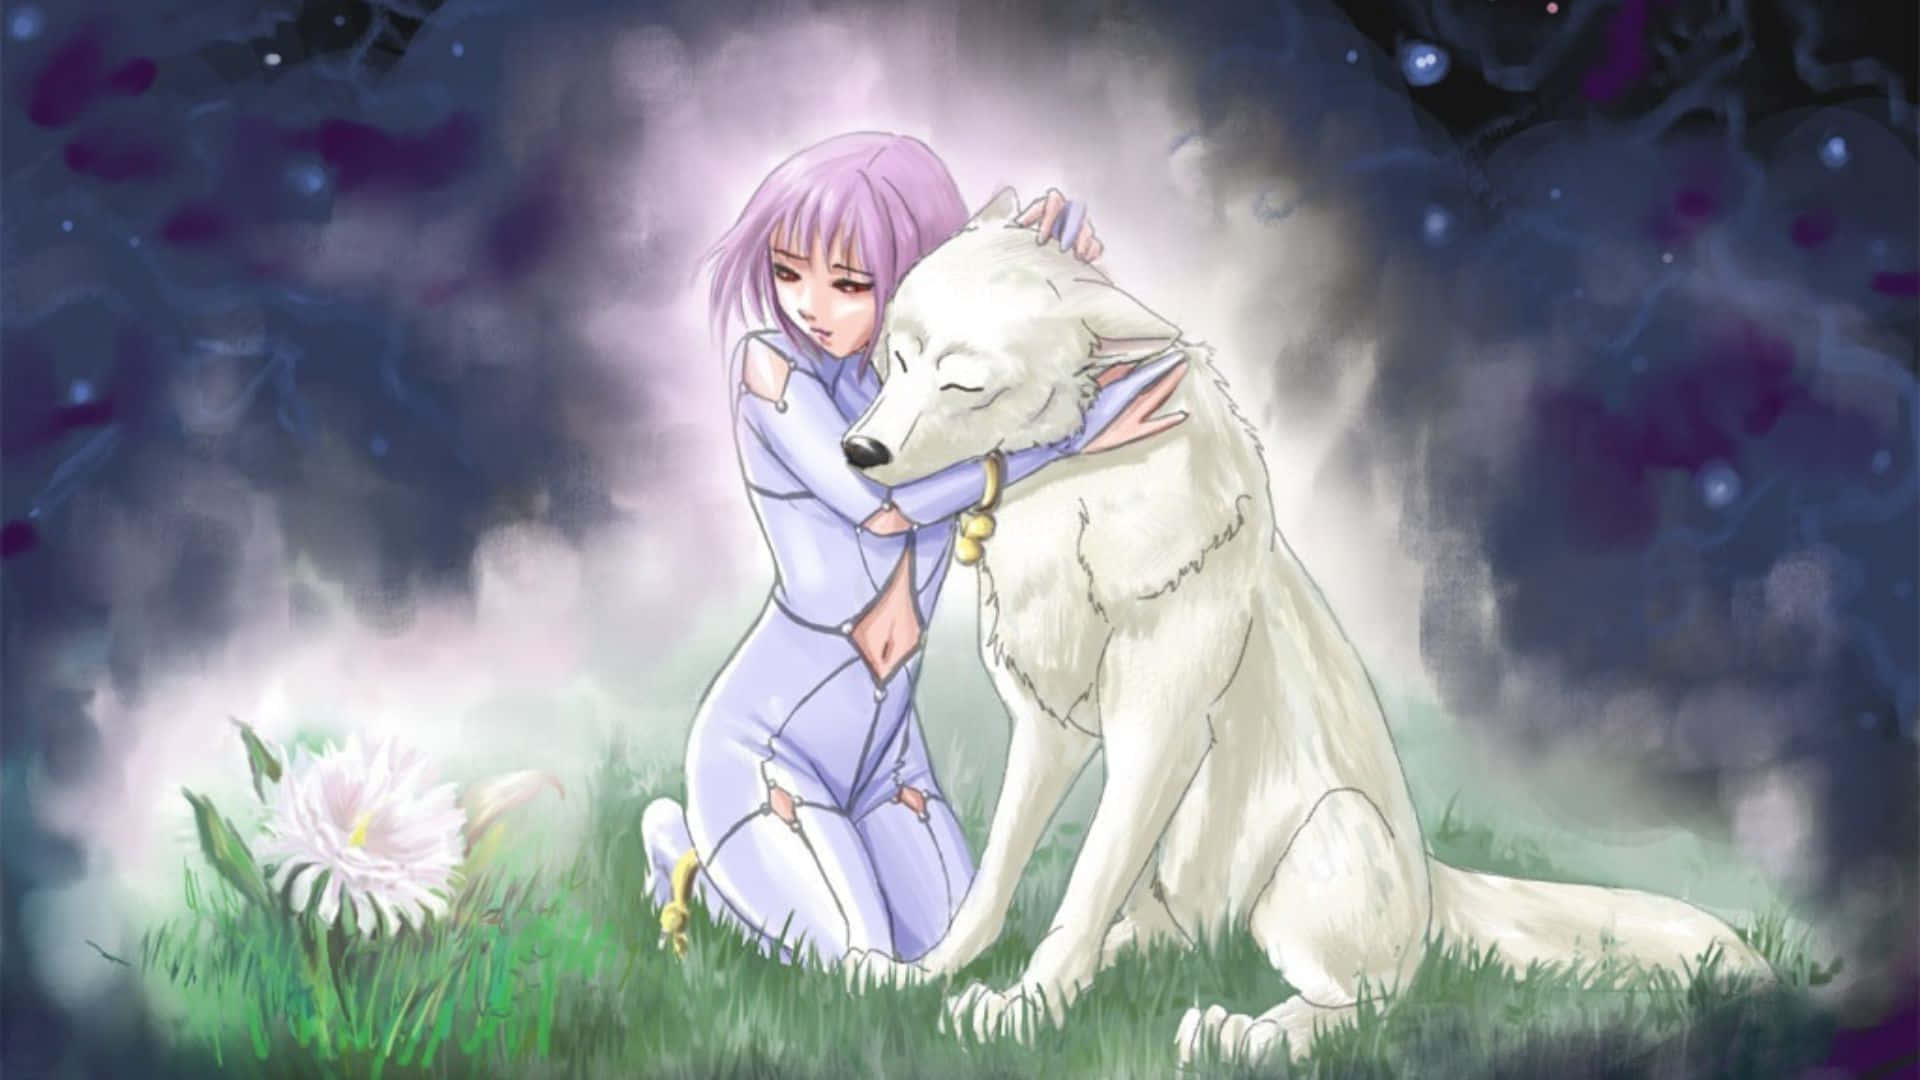 A wolf World Anime Wolves  LostFromthoughts  Wattpad